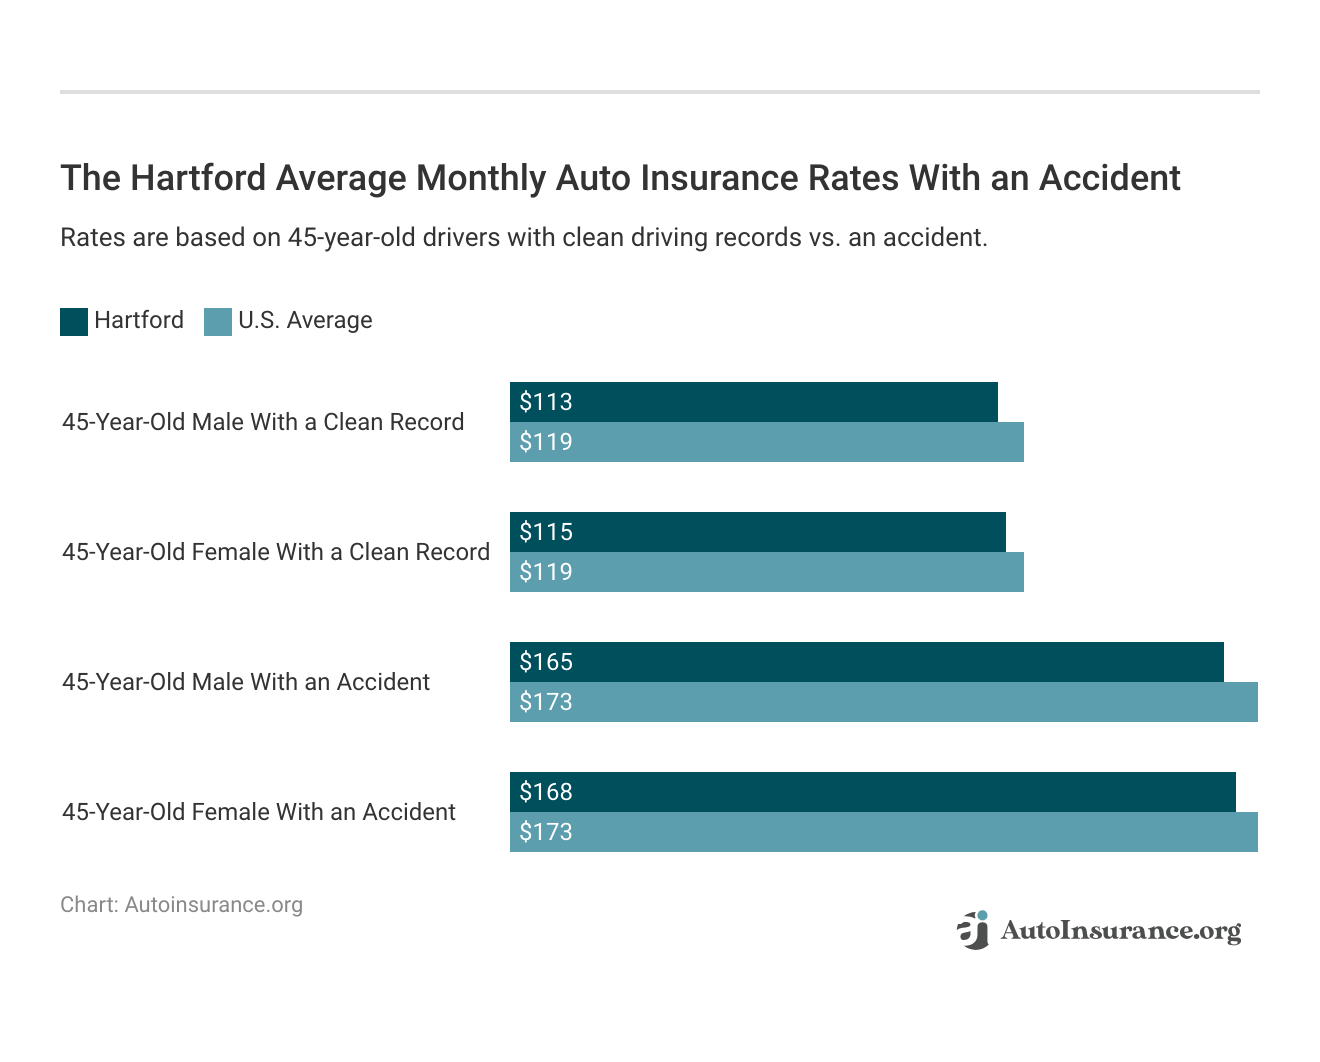 <h3>The Hartford Average Monthly Auto Insurance Rates With an Accident</h3>